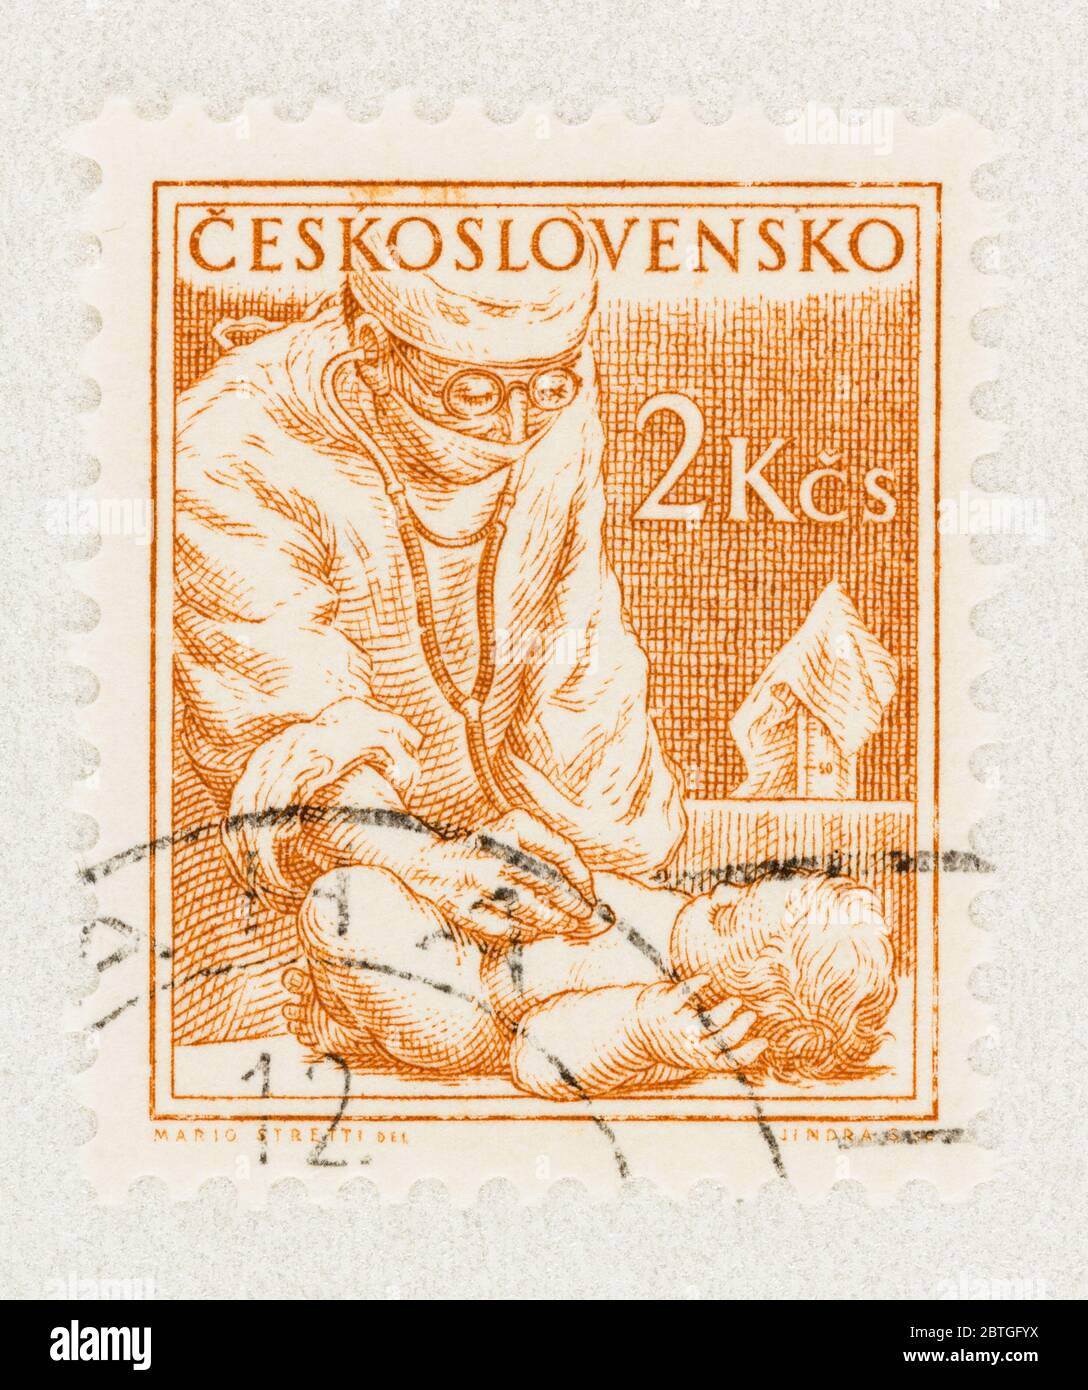 SEATTLE WASHINGTON - May 23, 2020:  Close up Czechoslovakia stamp from 1954 Professions Series, featuring pediatrician and baby. Scott # 655 Stock Photo